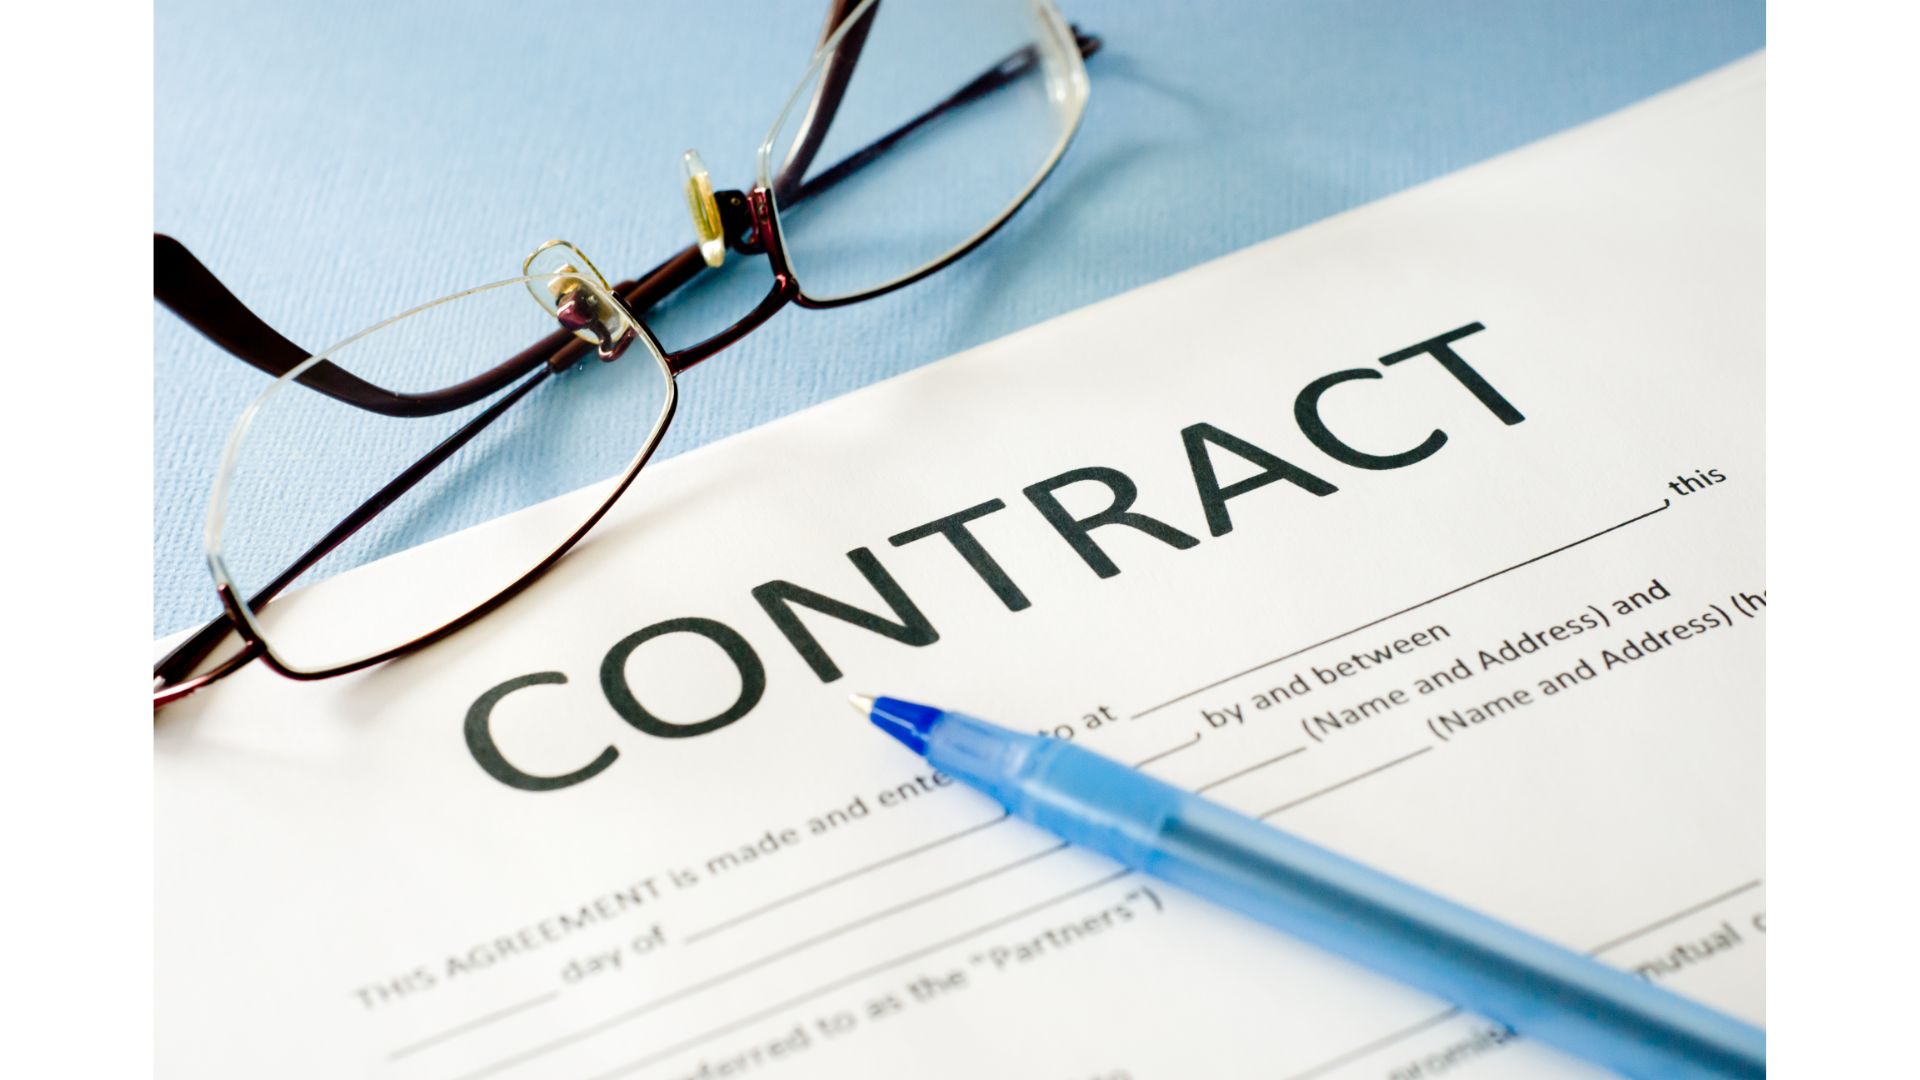 BUILDING CONTRACT